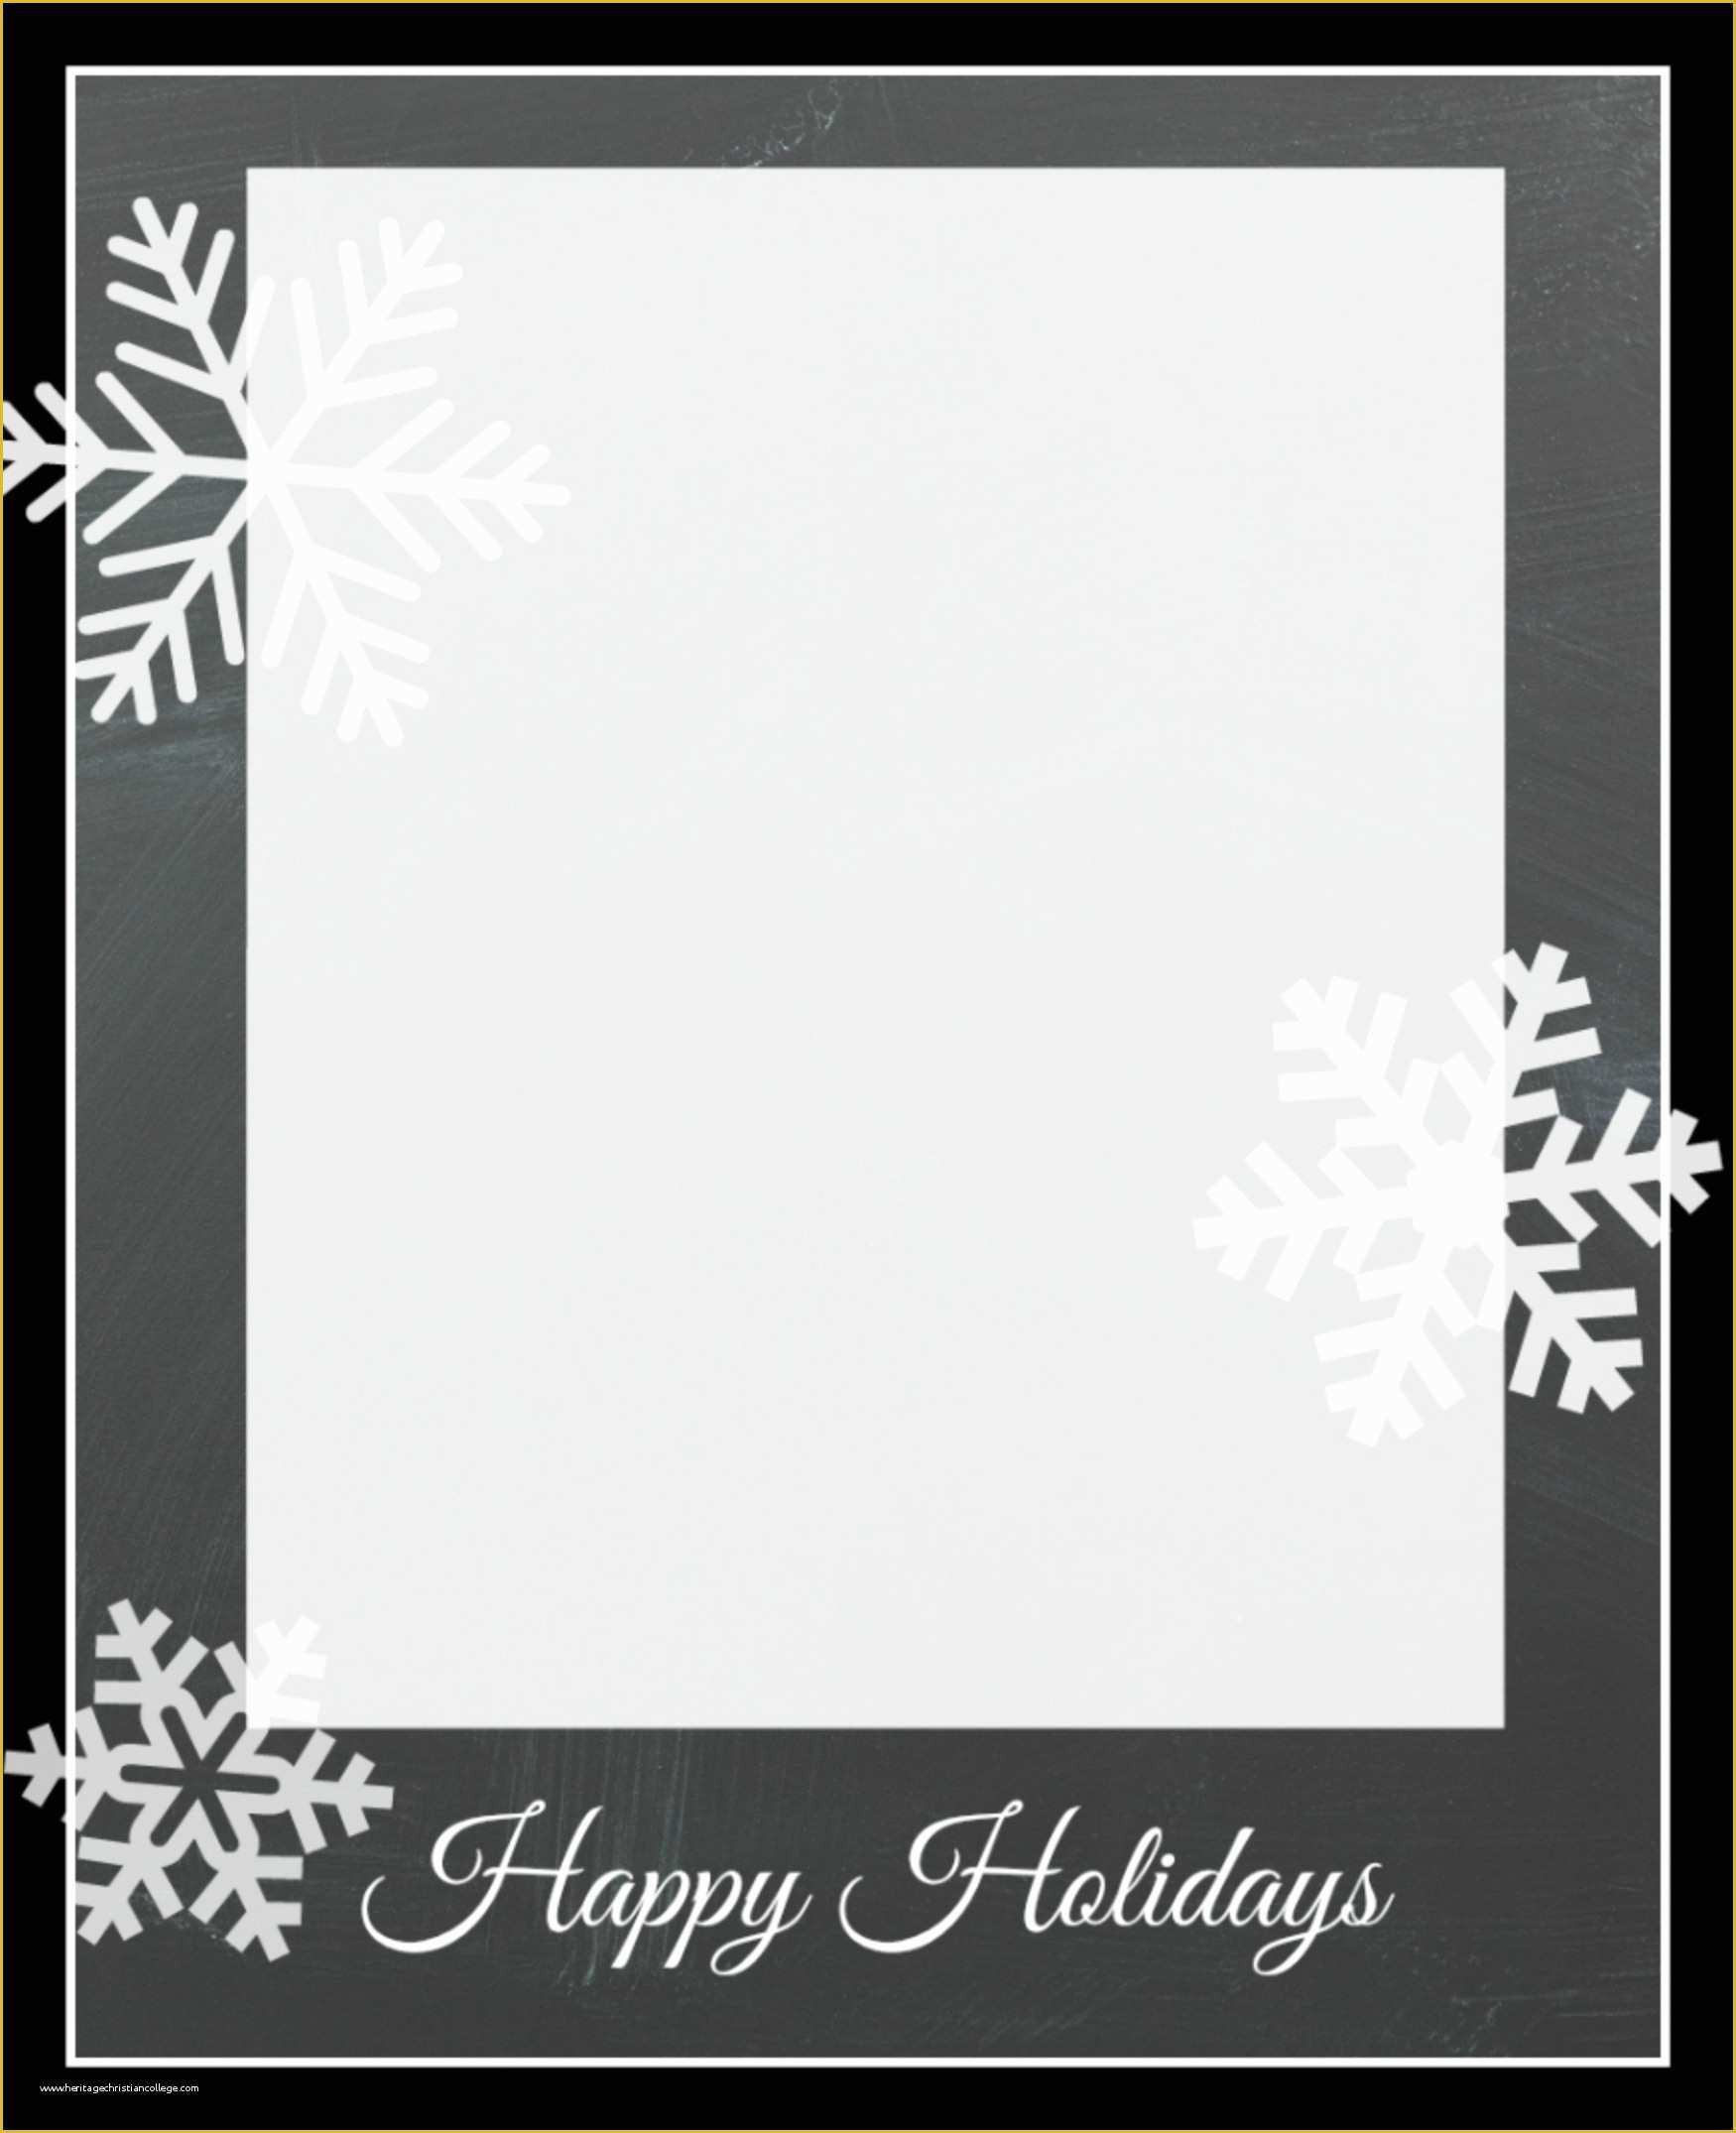 58 Free Christmas Card Templates for Word Heritagechristiancollege